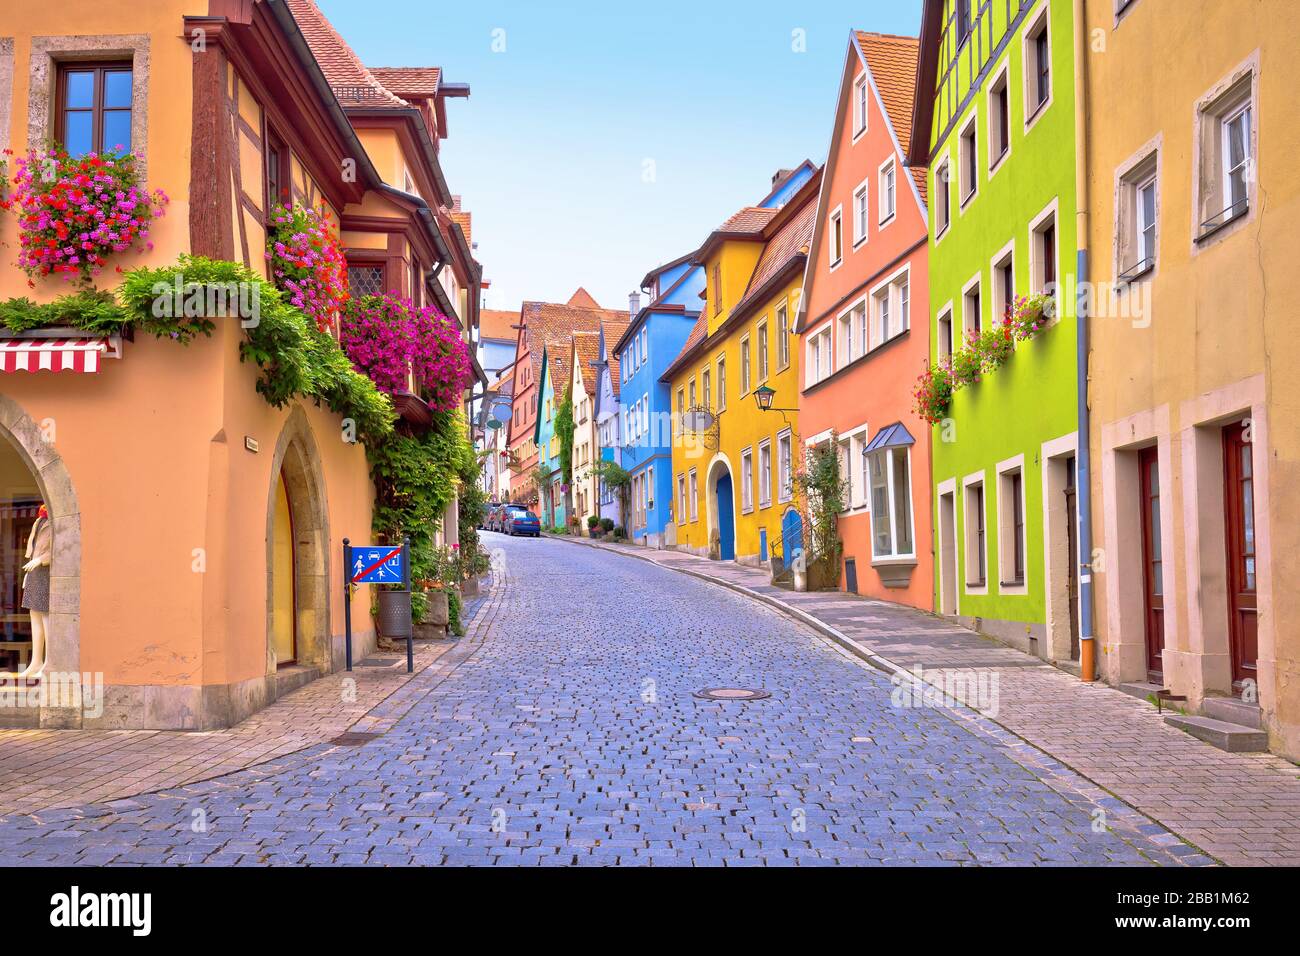 Rothenburg ob der Tauber. Cobbled colorful street and architecture of old town of Rothenburg ob der Tauber, Romantic road of Bavaria region of Germany Stock Photo